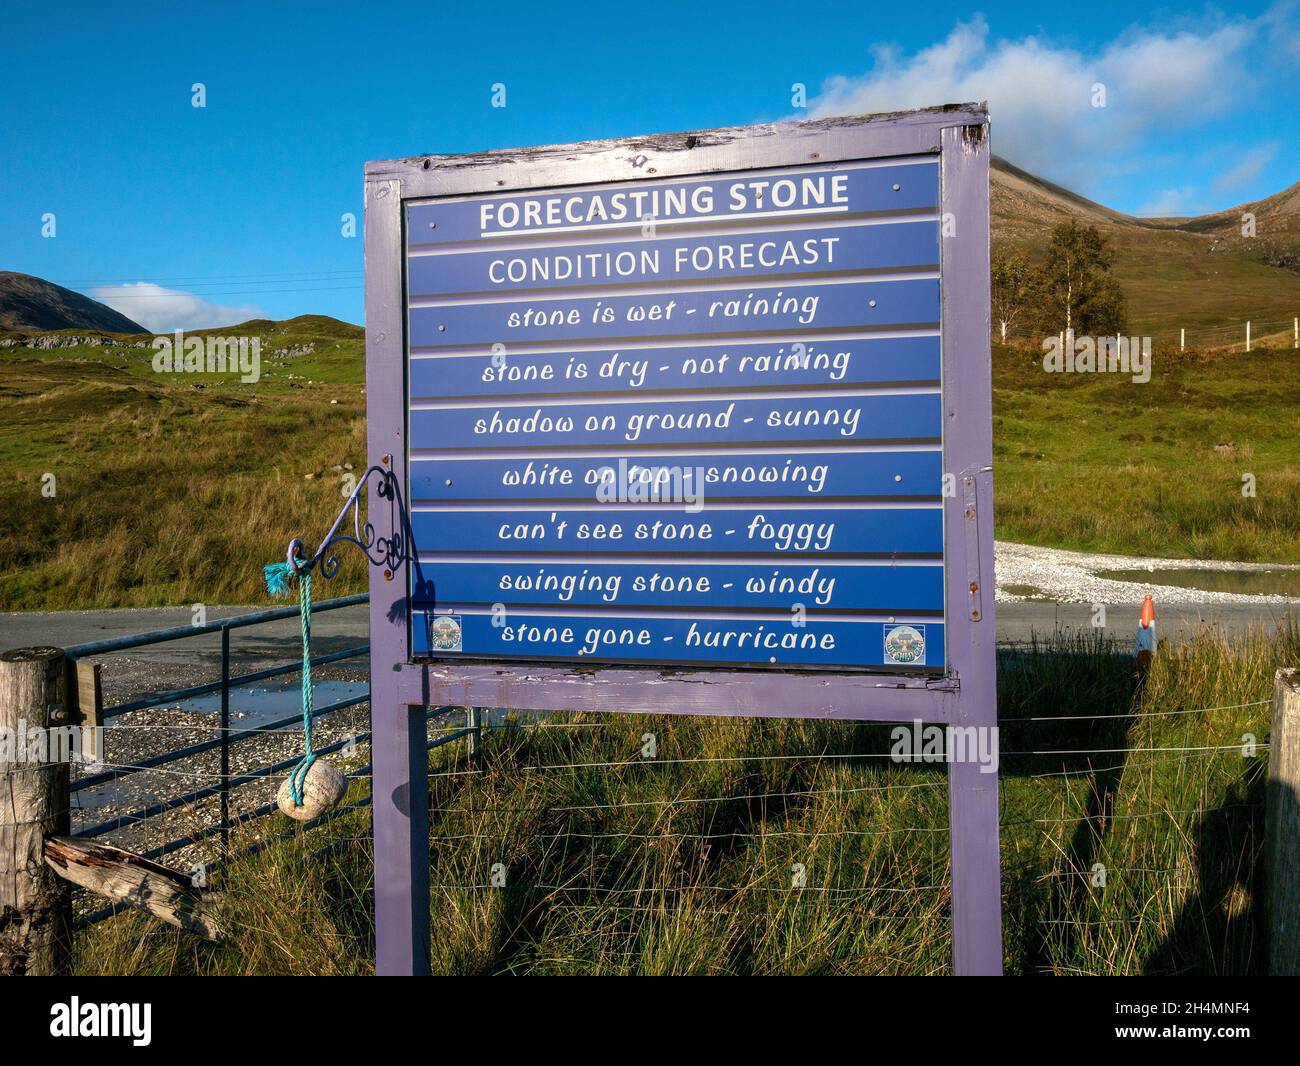 Humorous weather forecasting stone sign, Amy's Place Tearoom (was Blue Shed Cafe), Torrin, Isle of Skye, Scotland, UK Stock Photo